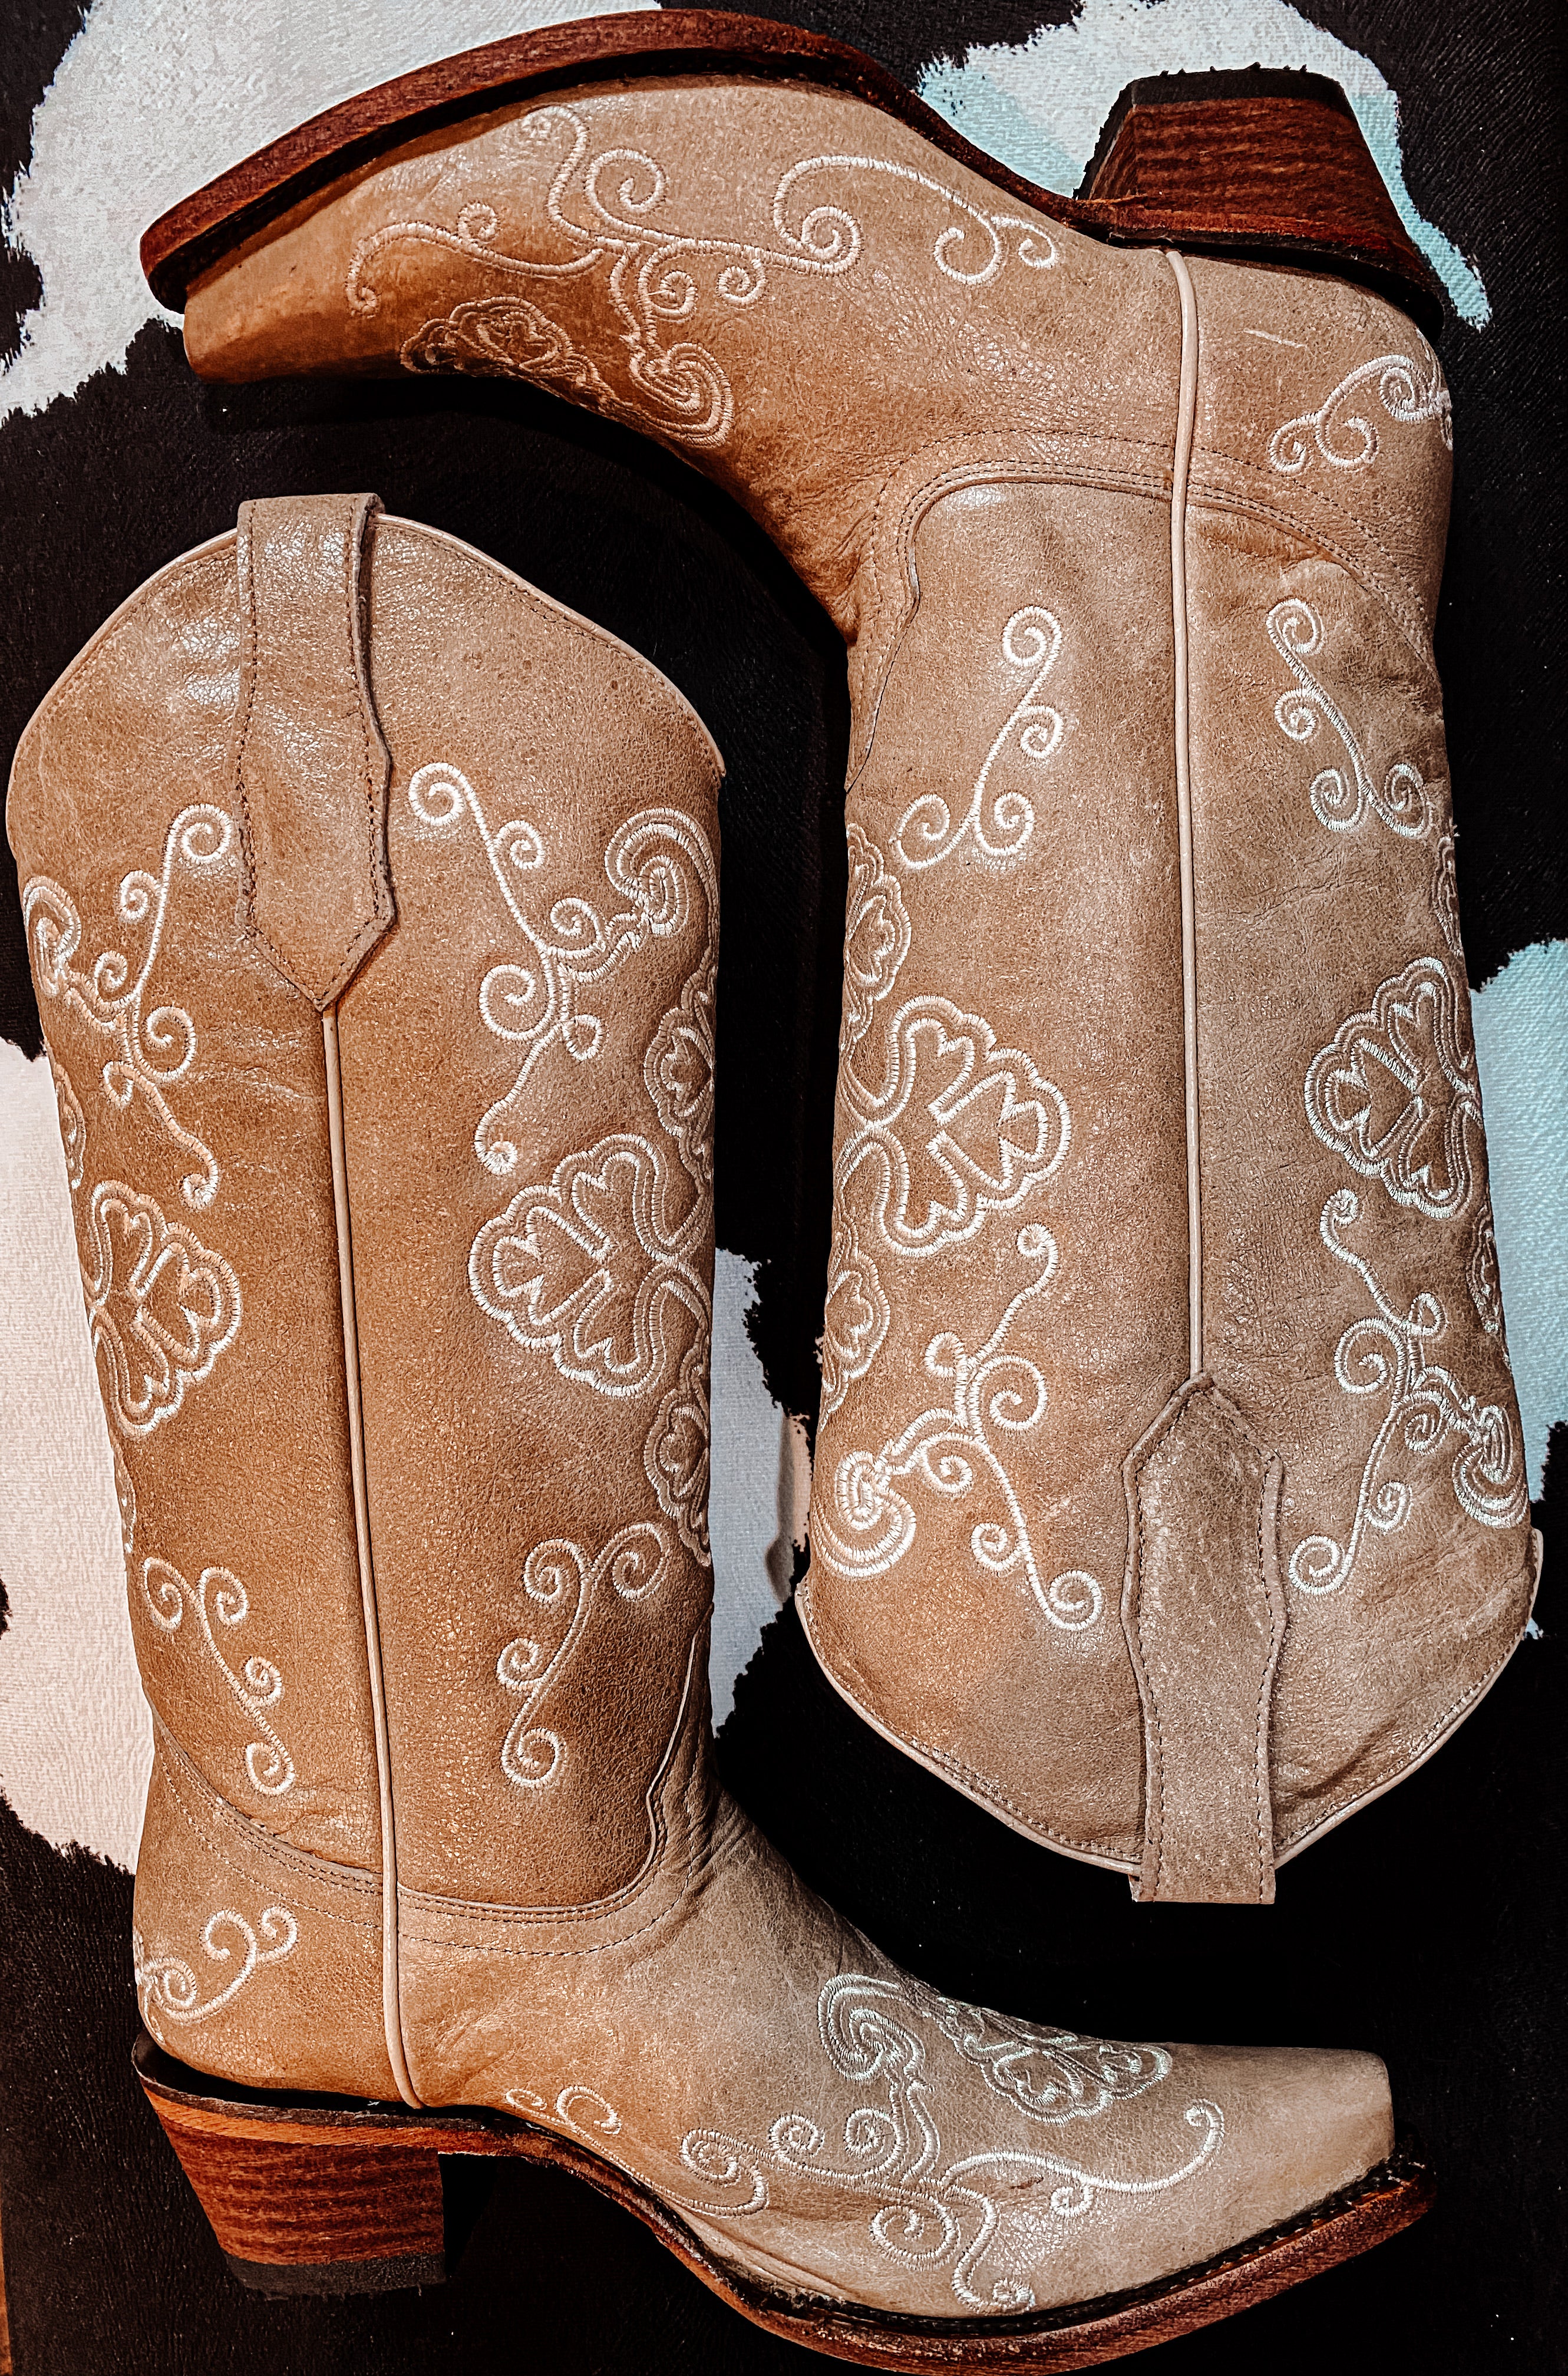 Bone Embroidered Boot - The Branded Blonde